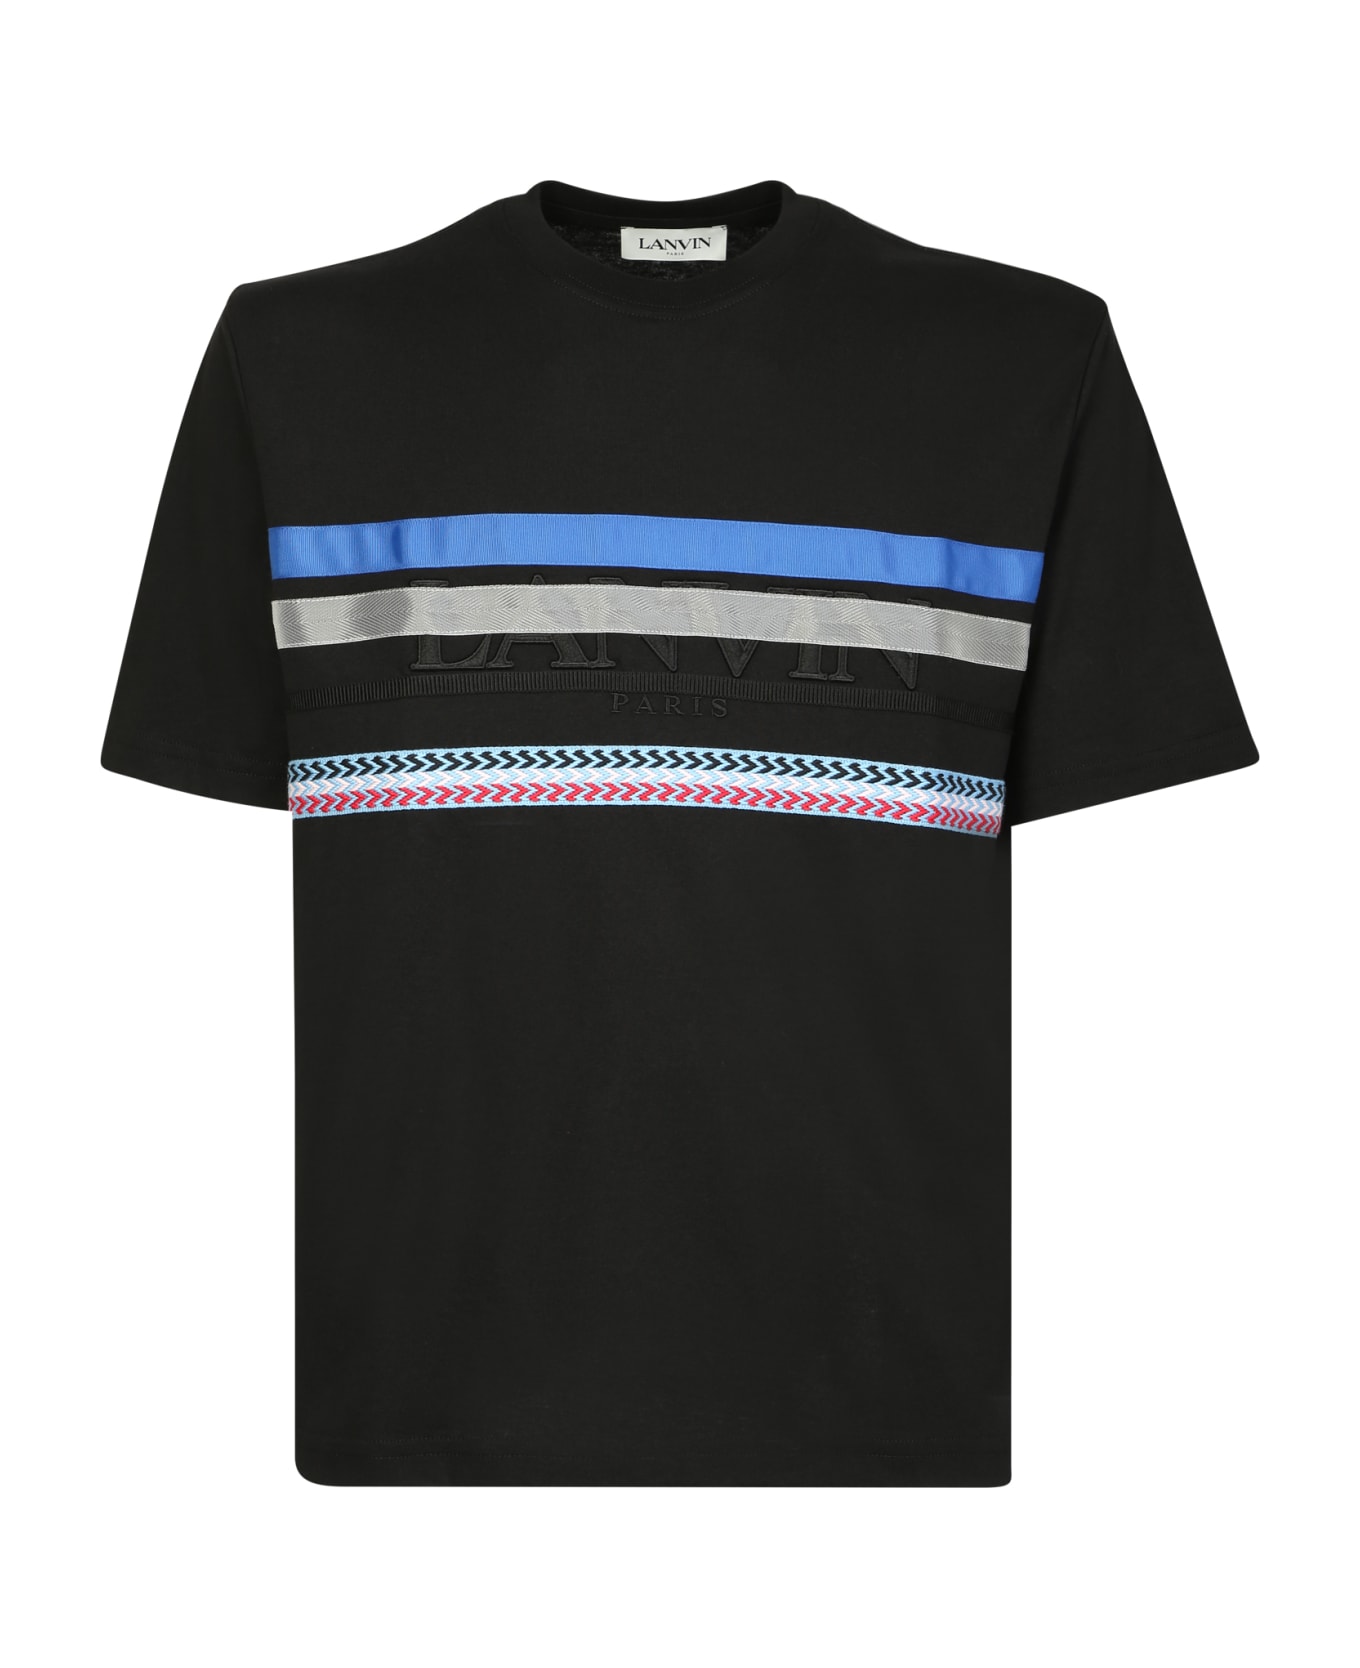 Lanvin T-shirt With Logo And Graphic Print - Black シャツ